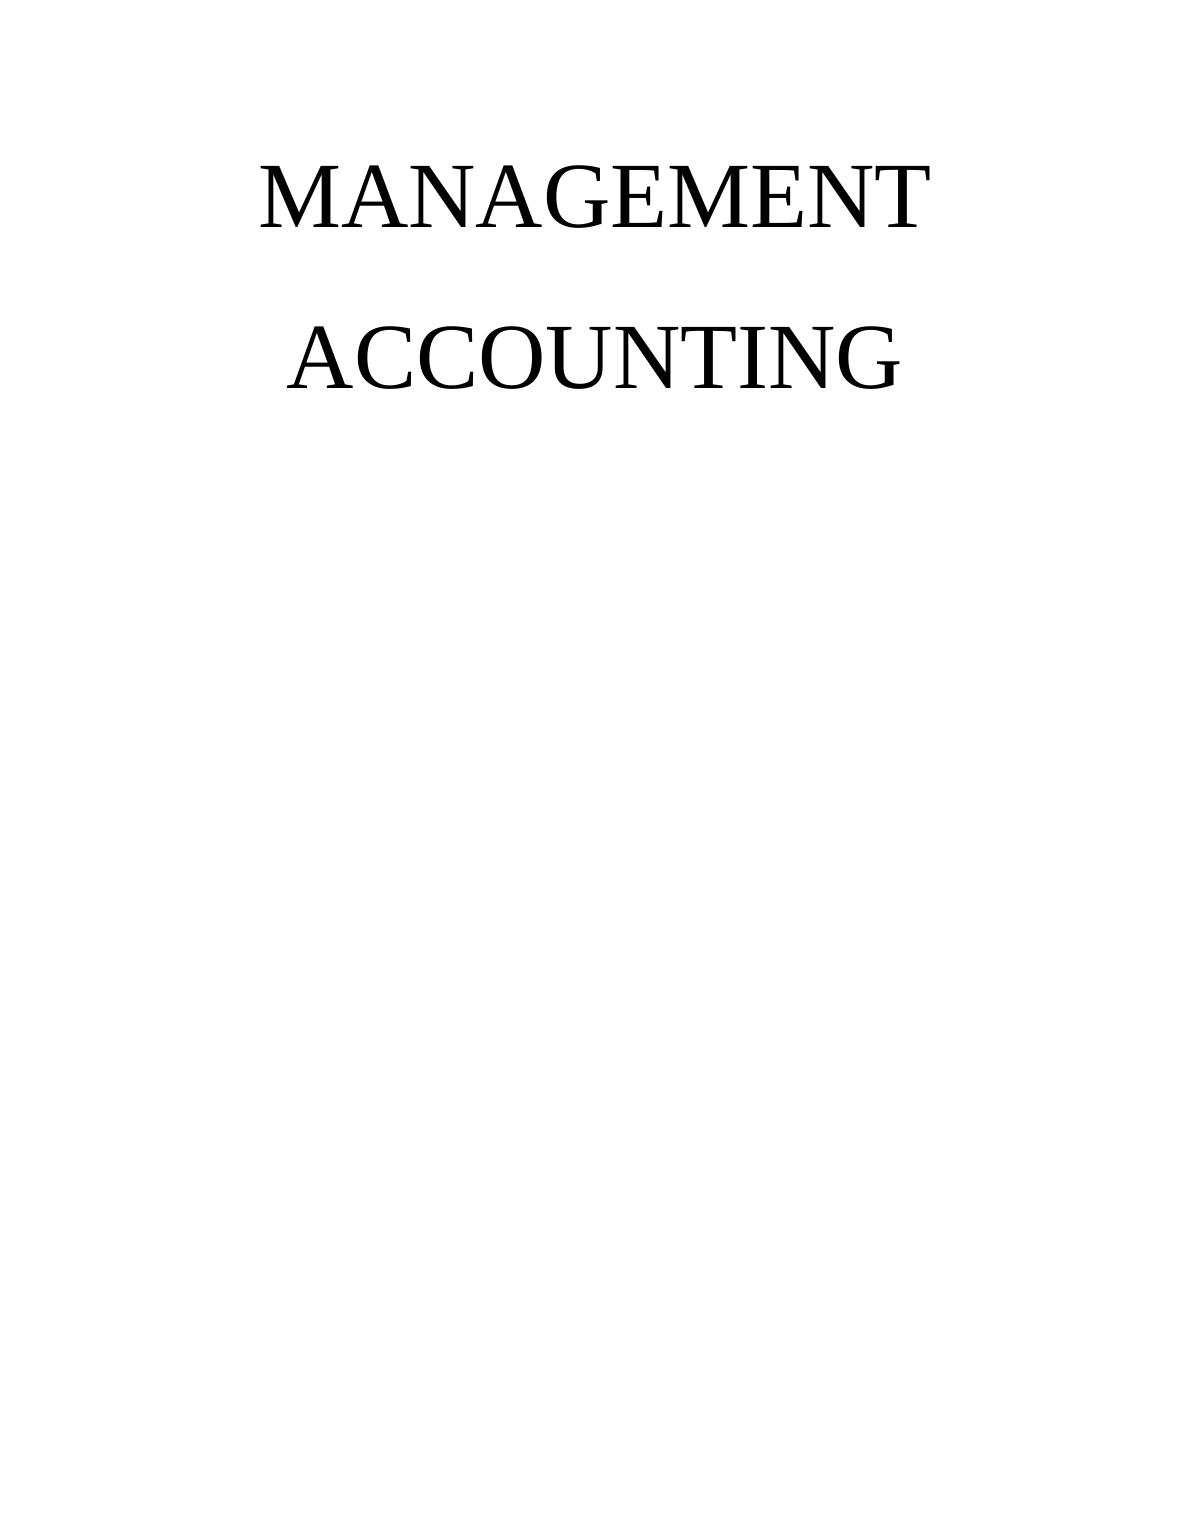 Management Accounting Techniques of Jeffrey and Sons : Report_1